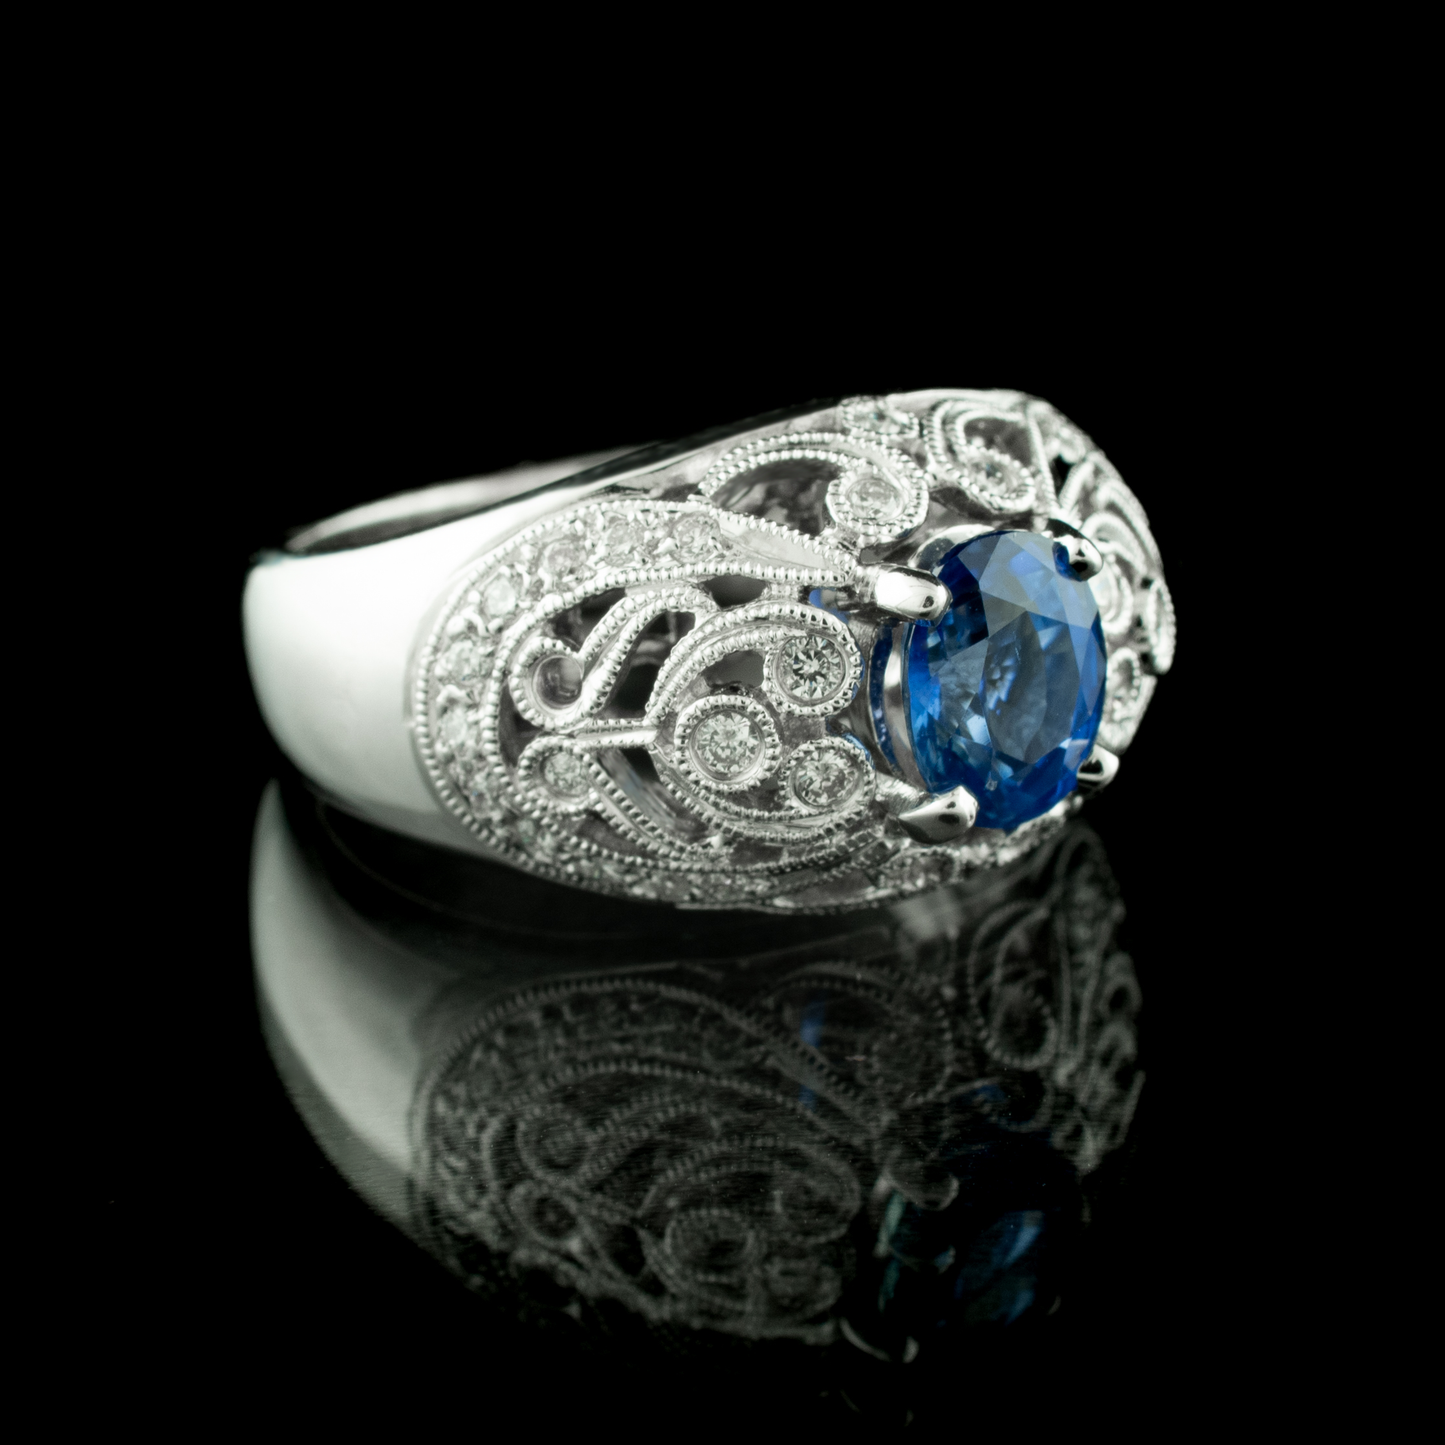 The Sapphire Dome Ring